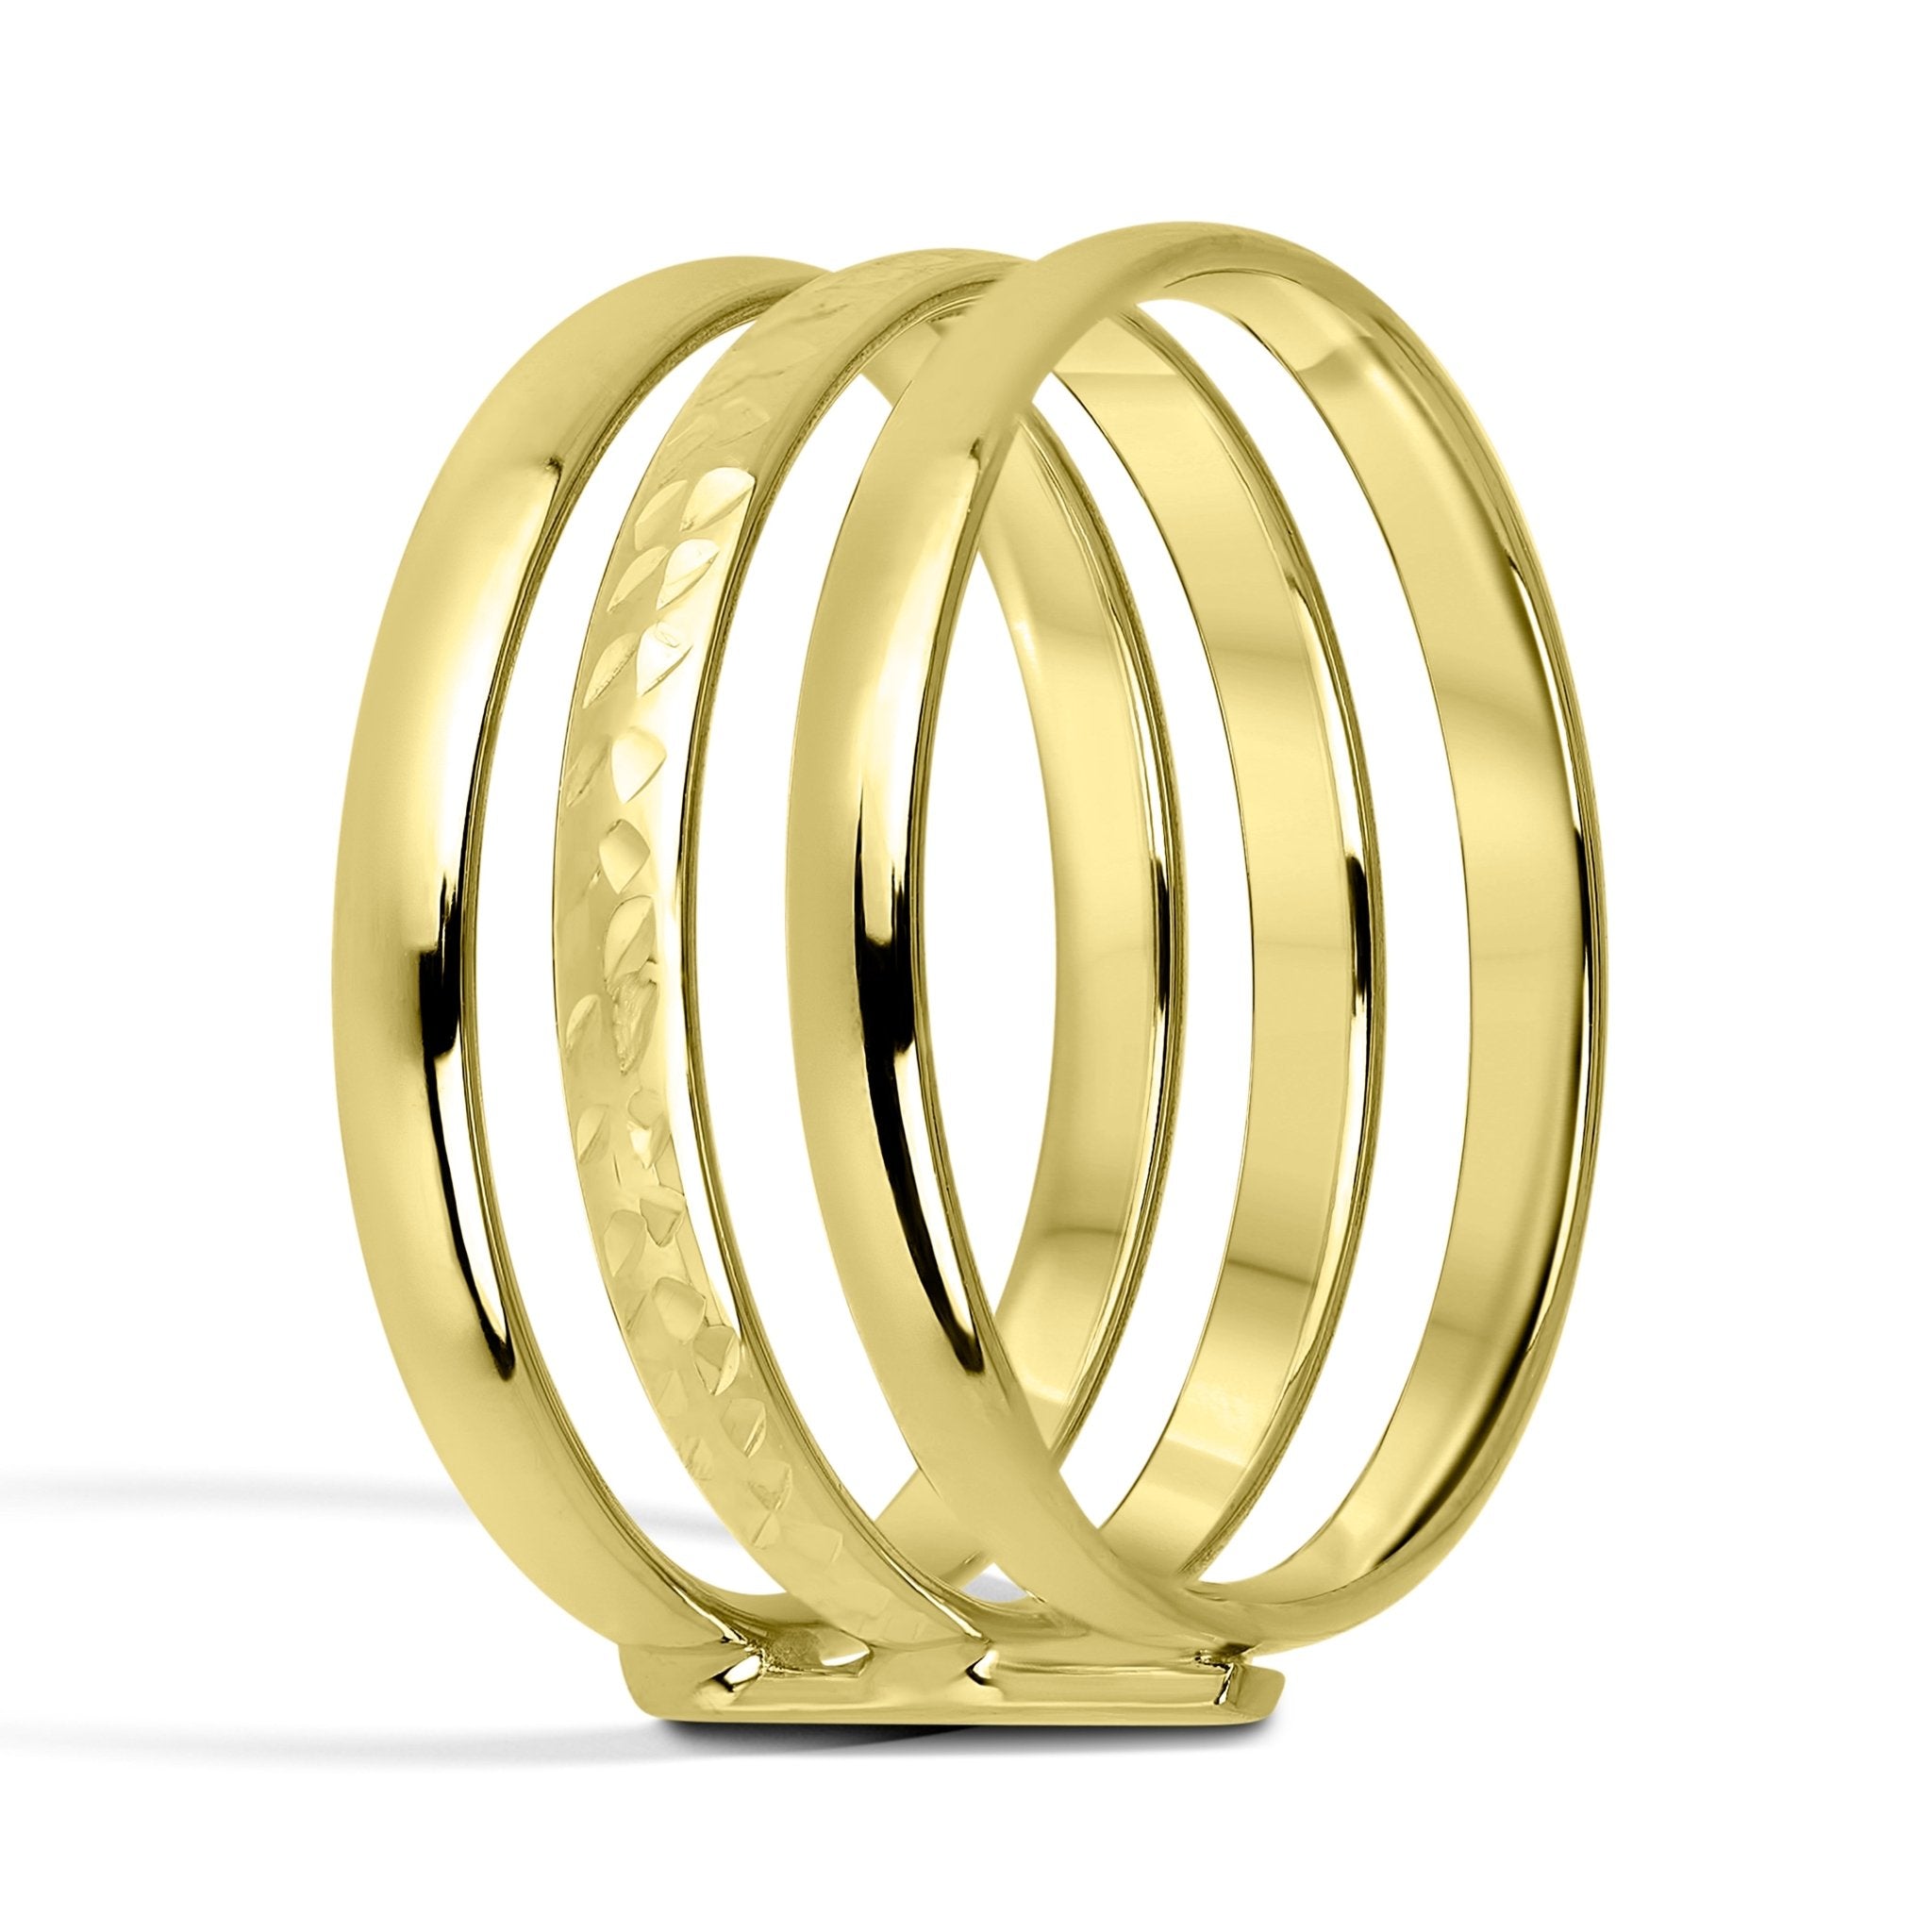 1.6mm Round Band in 14k Yellow Gold - EC Design Jewelry